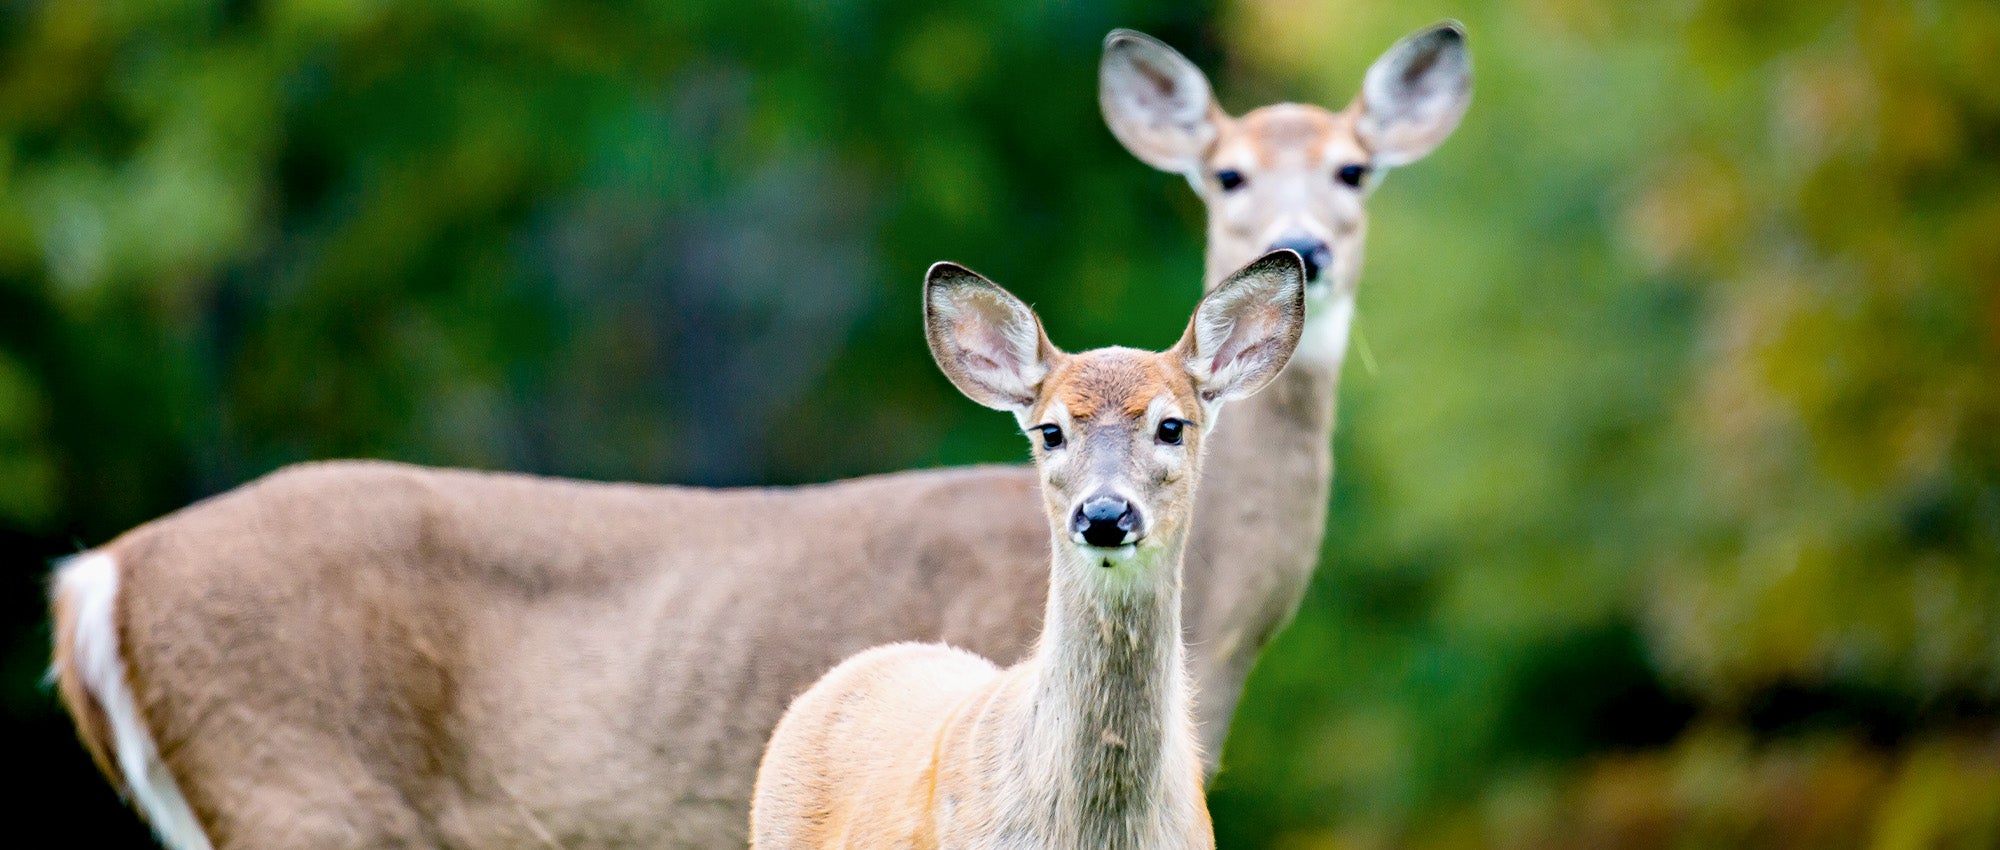 What to do about deer | The Humane Society of the United States